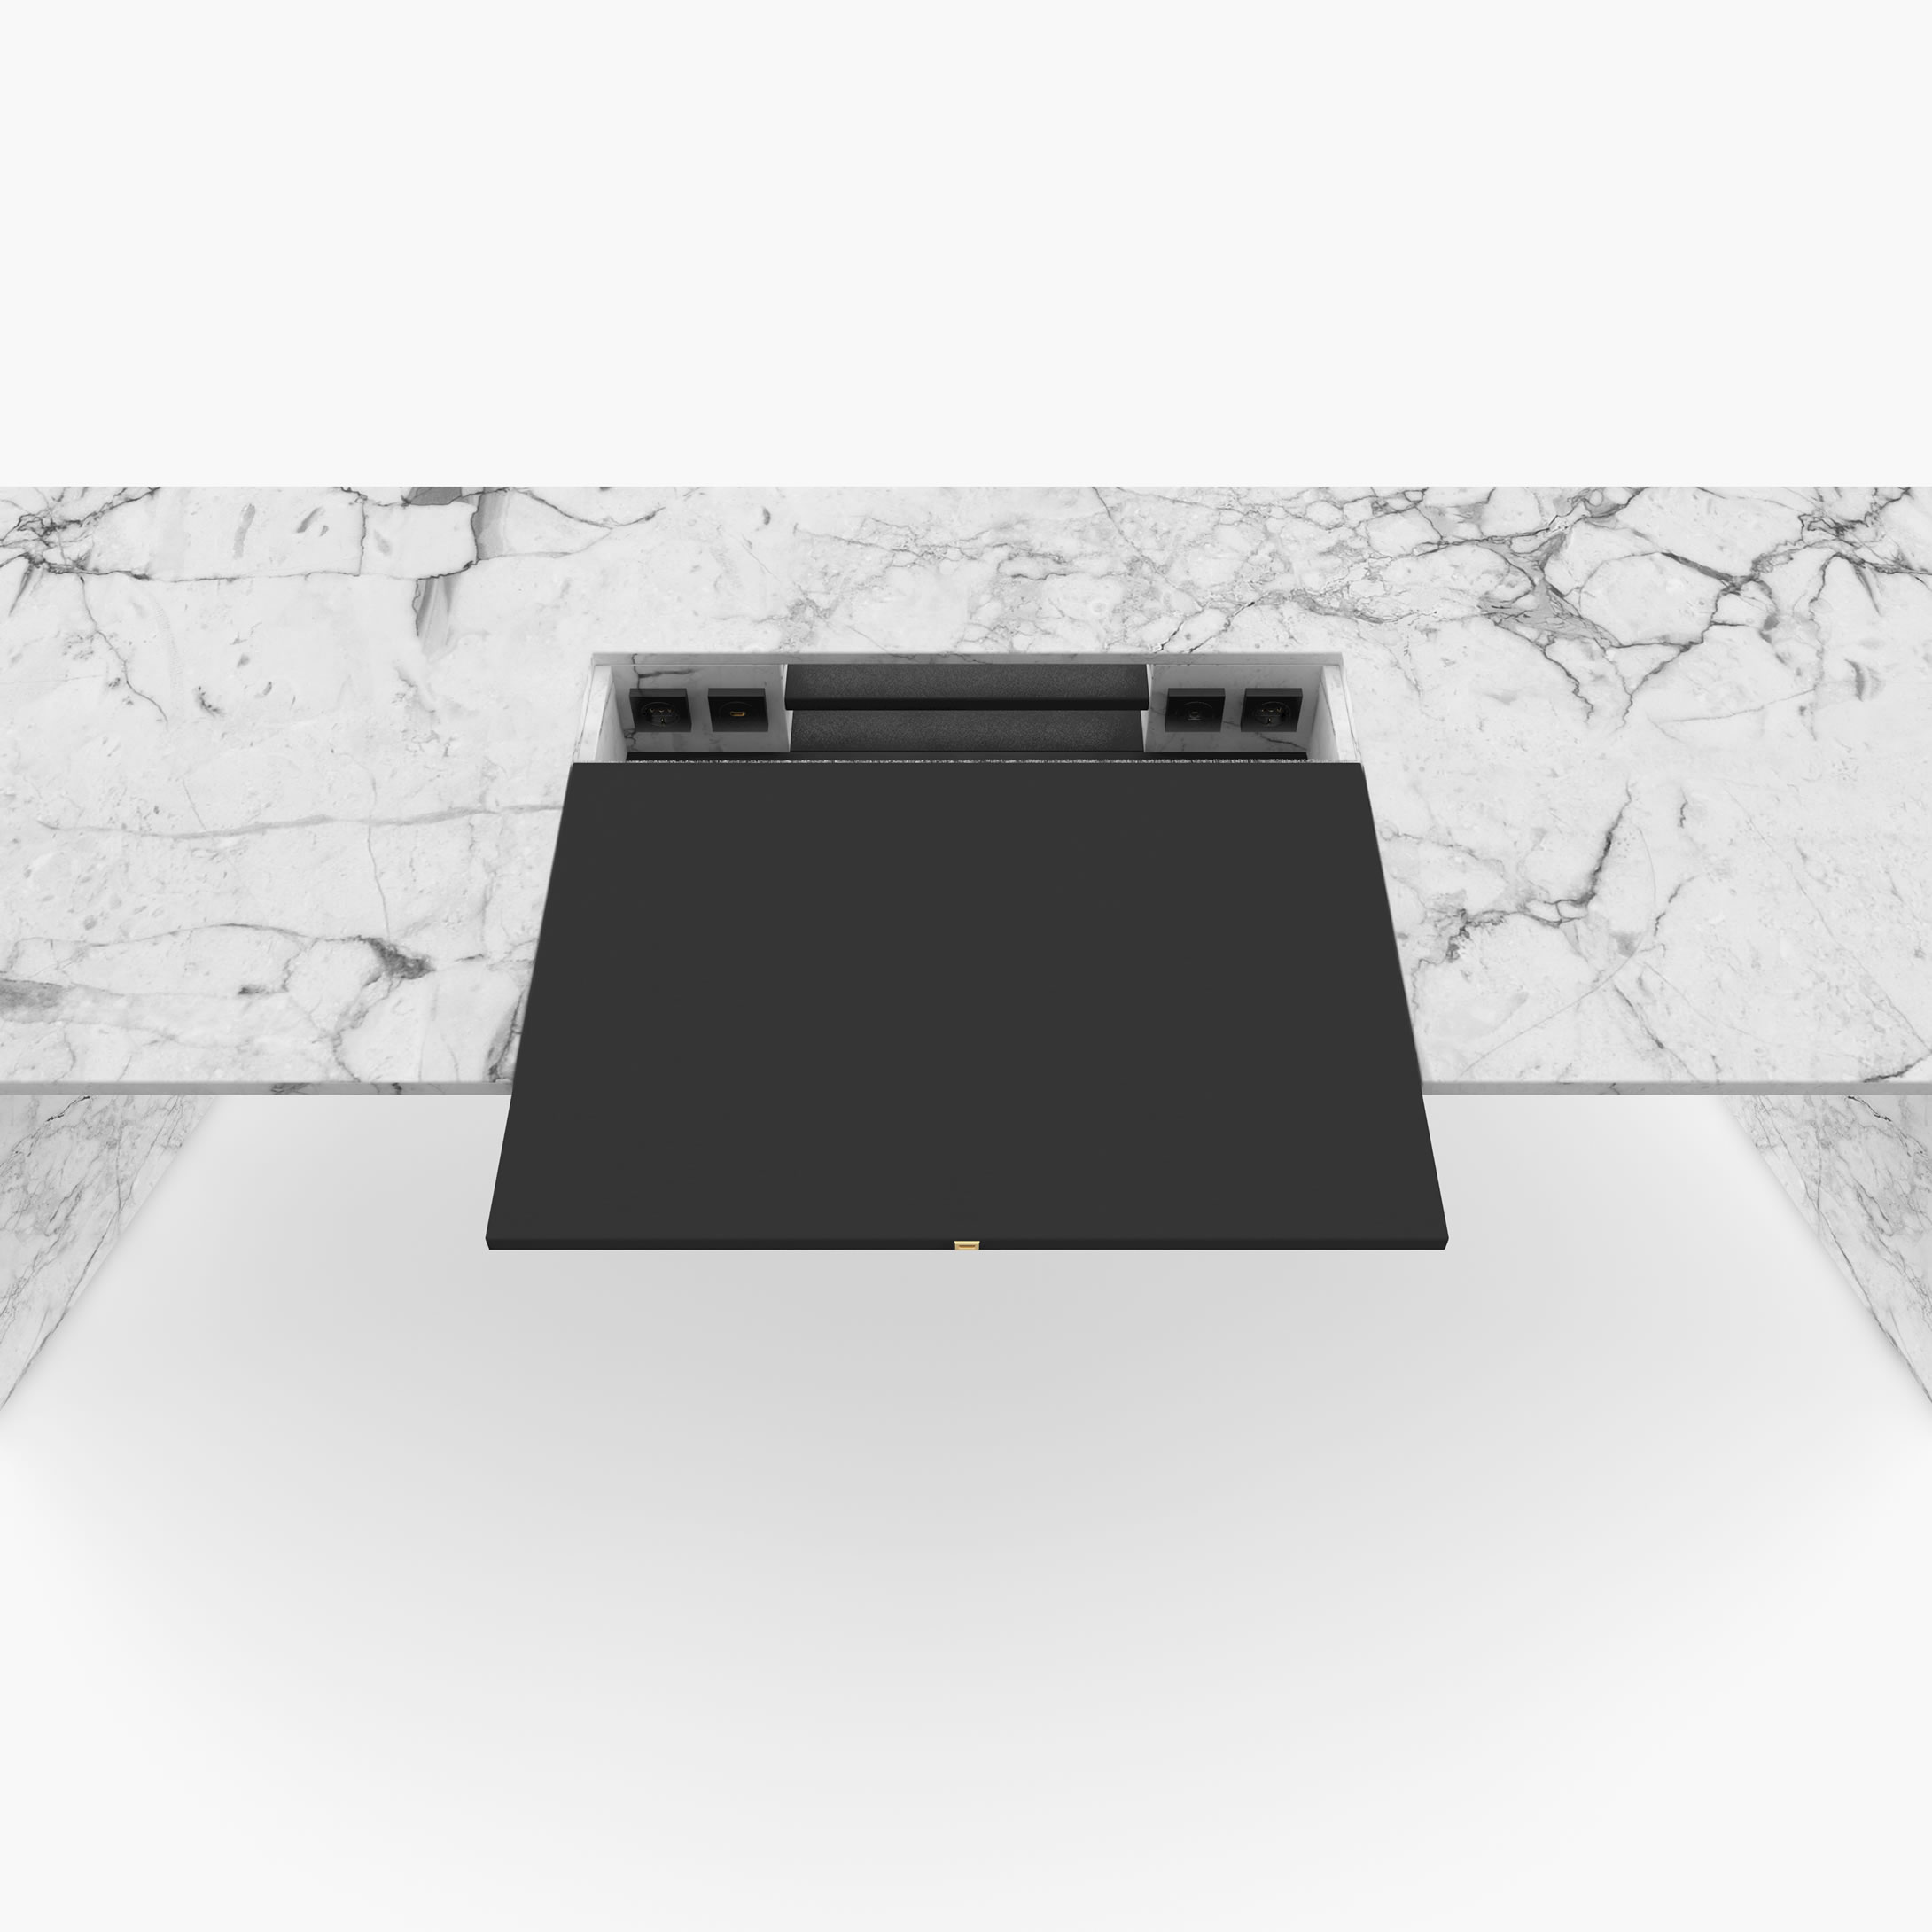 Desk with extensible writing pad White Arabescato Marble beautiful private workspace piece of art Desks FS 418 2 FELIX SCHWAKE